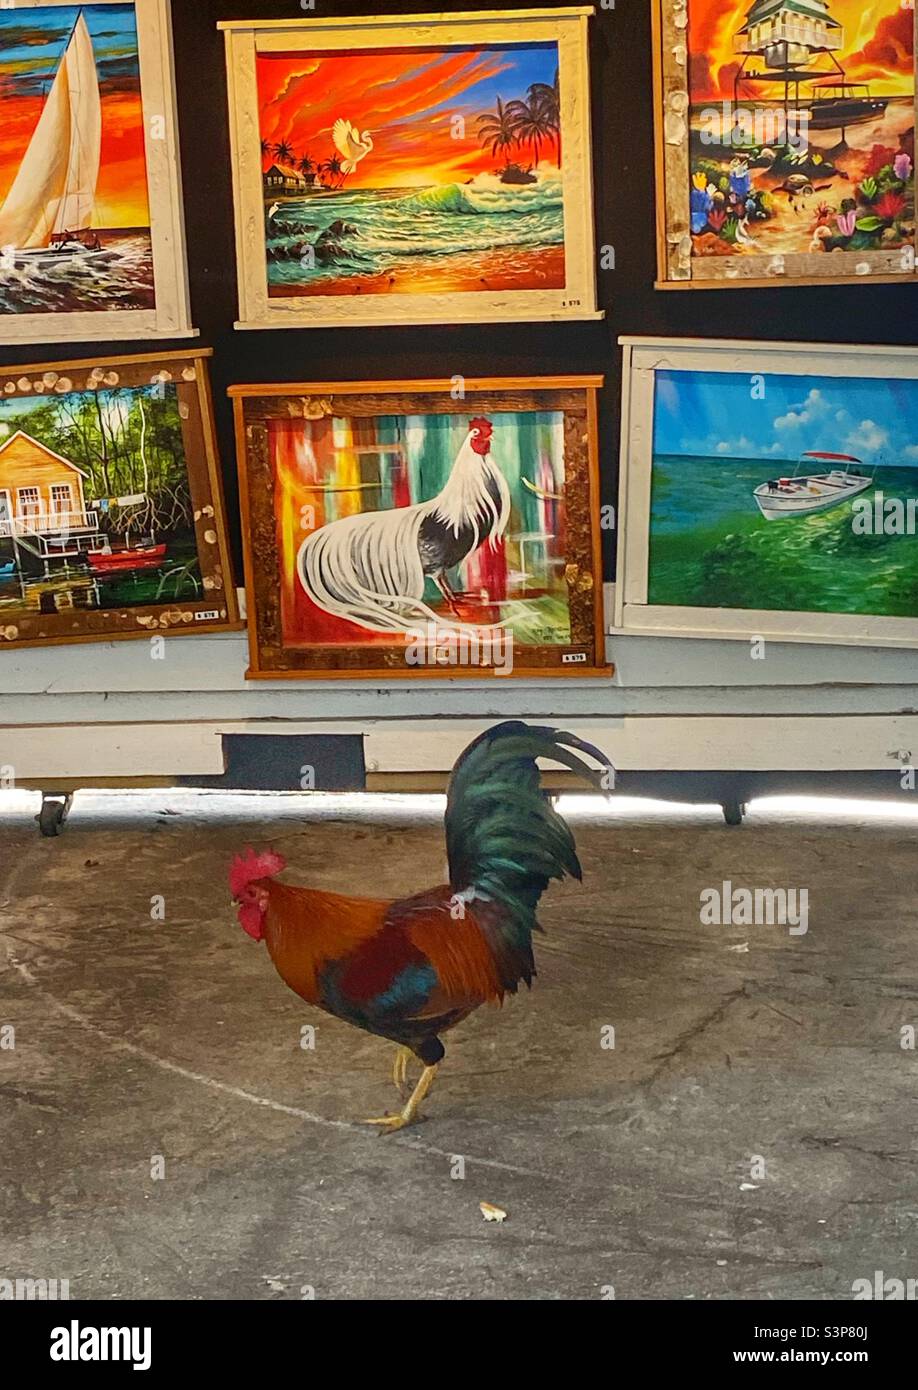 A real rooster standing in front of an art stand where there is a painting of a rooster.  Key West Florida Stock Photo